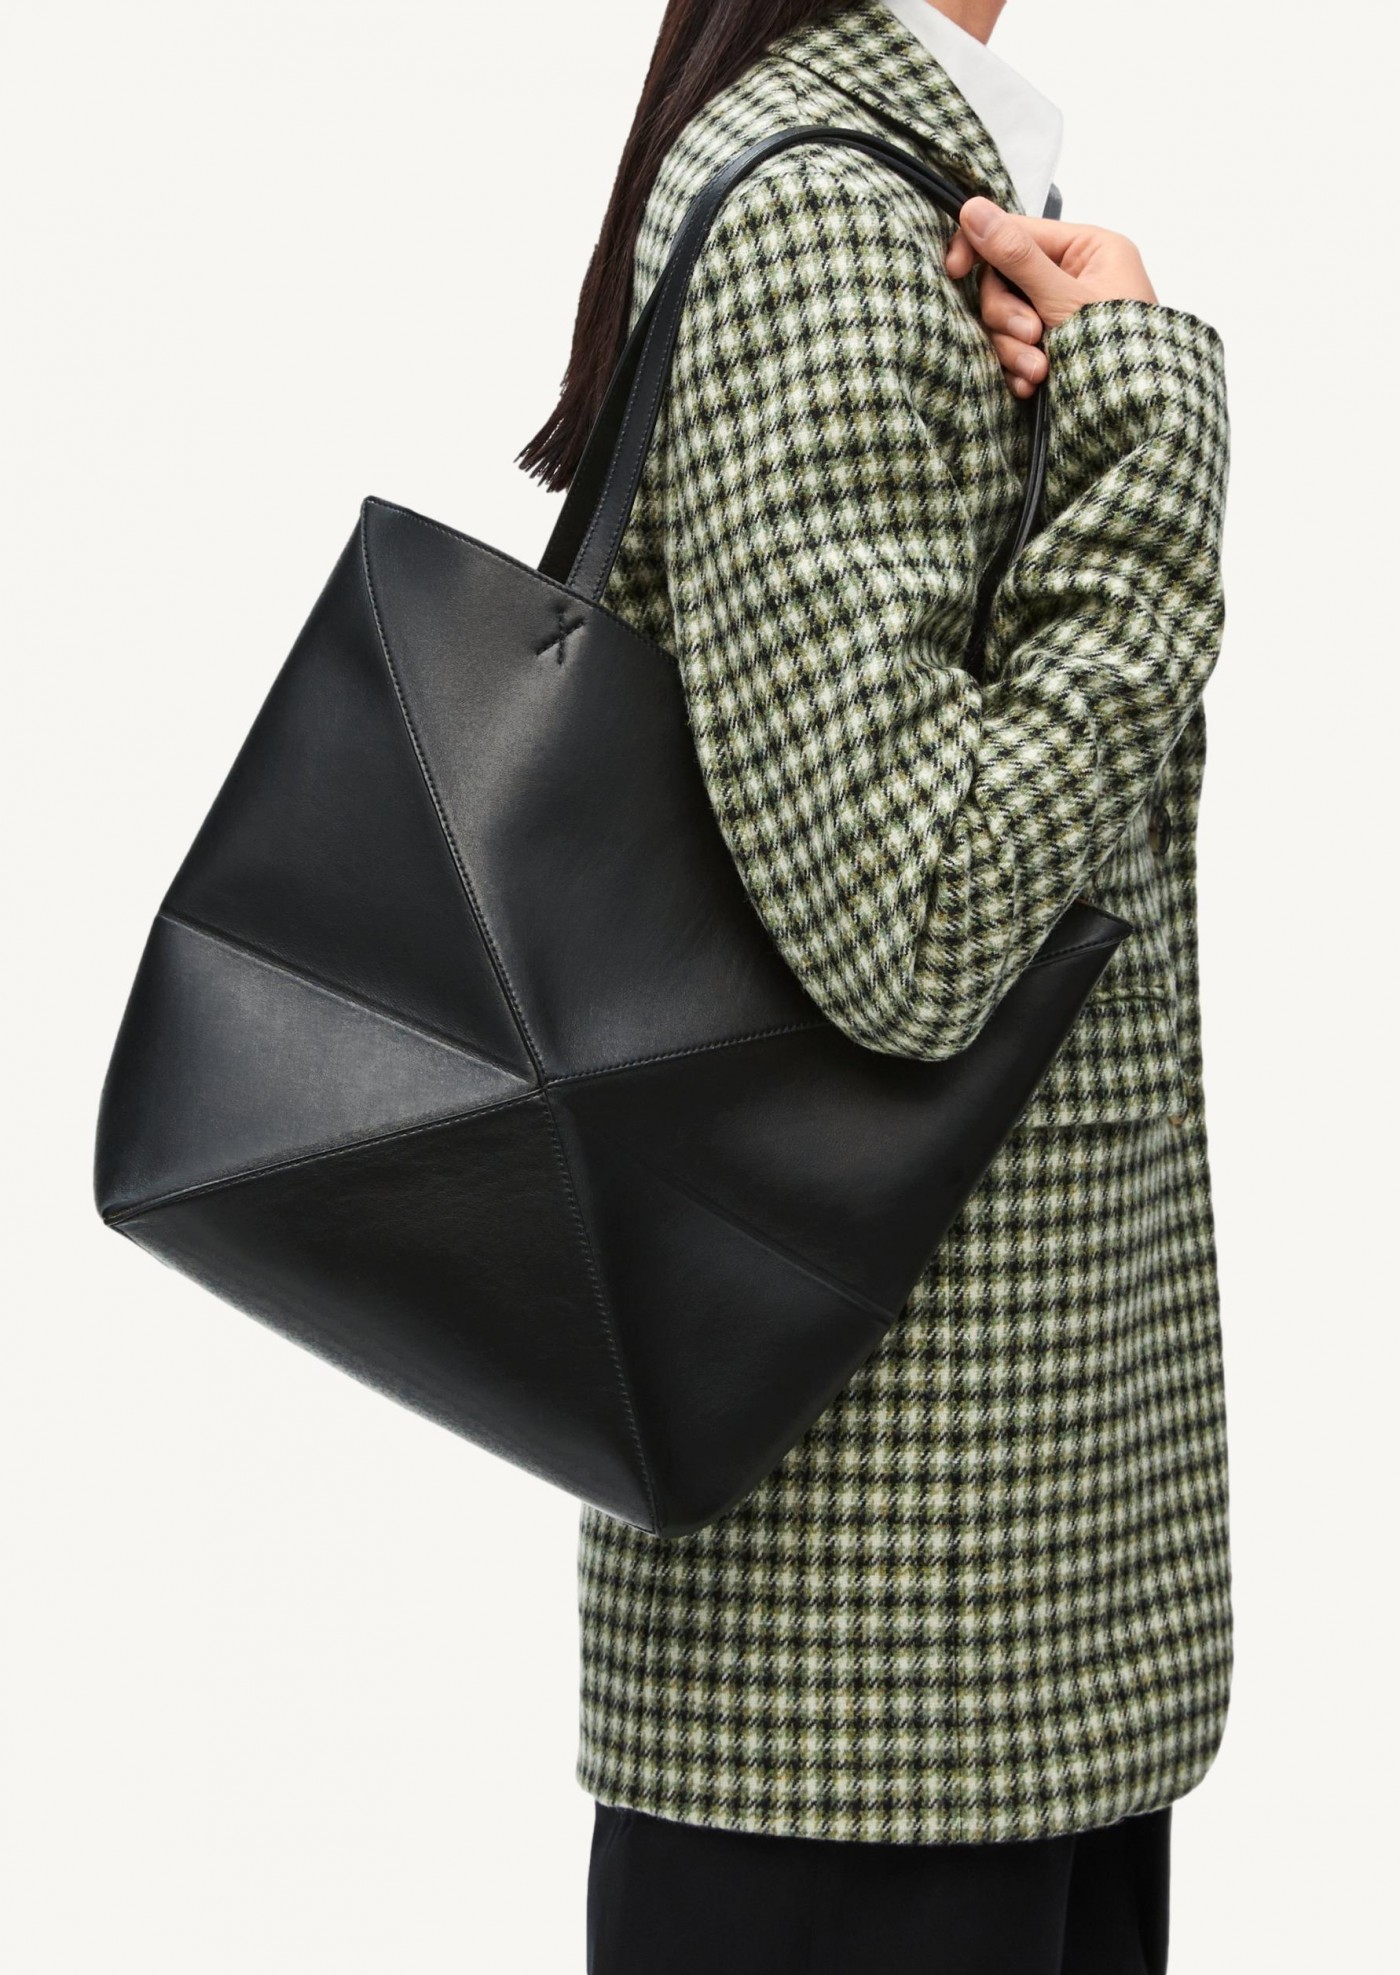 Puzzle Fold Tote in glossy black calfskin